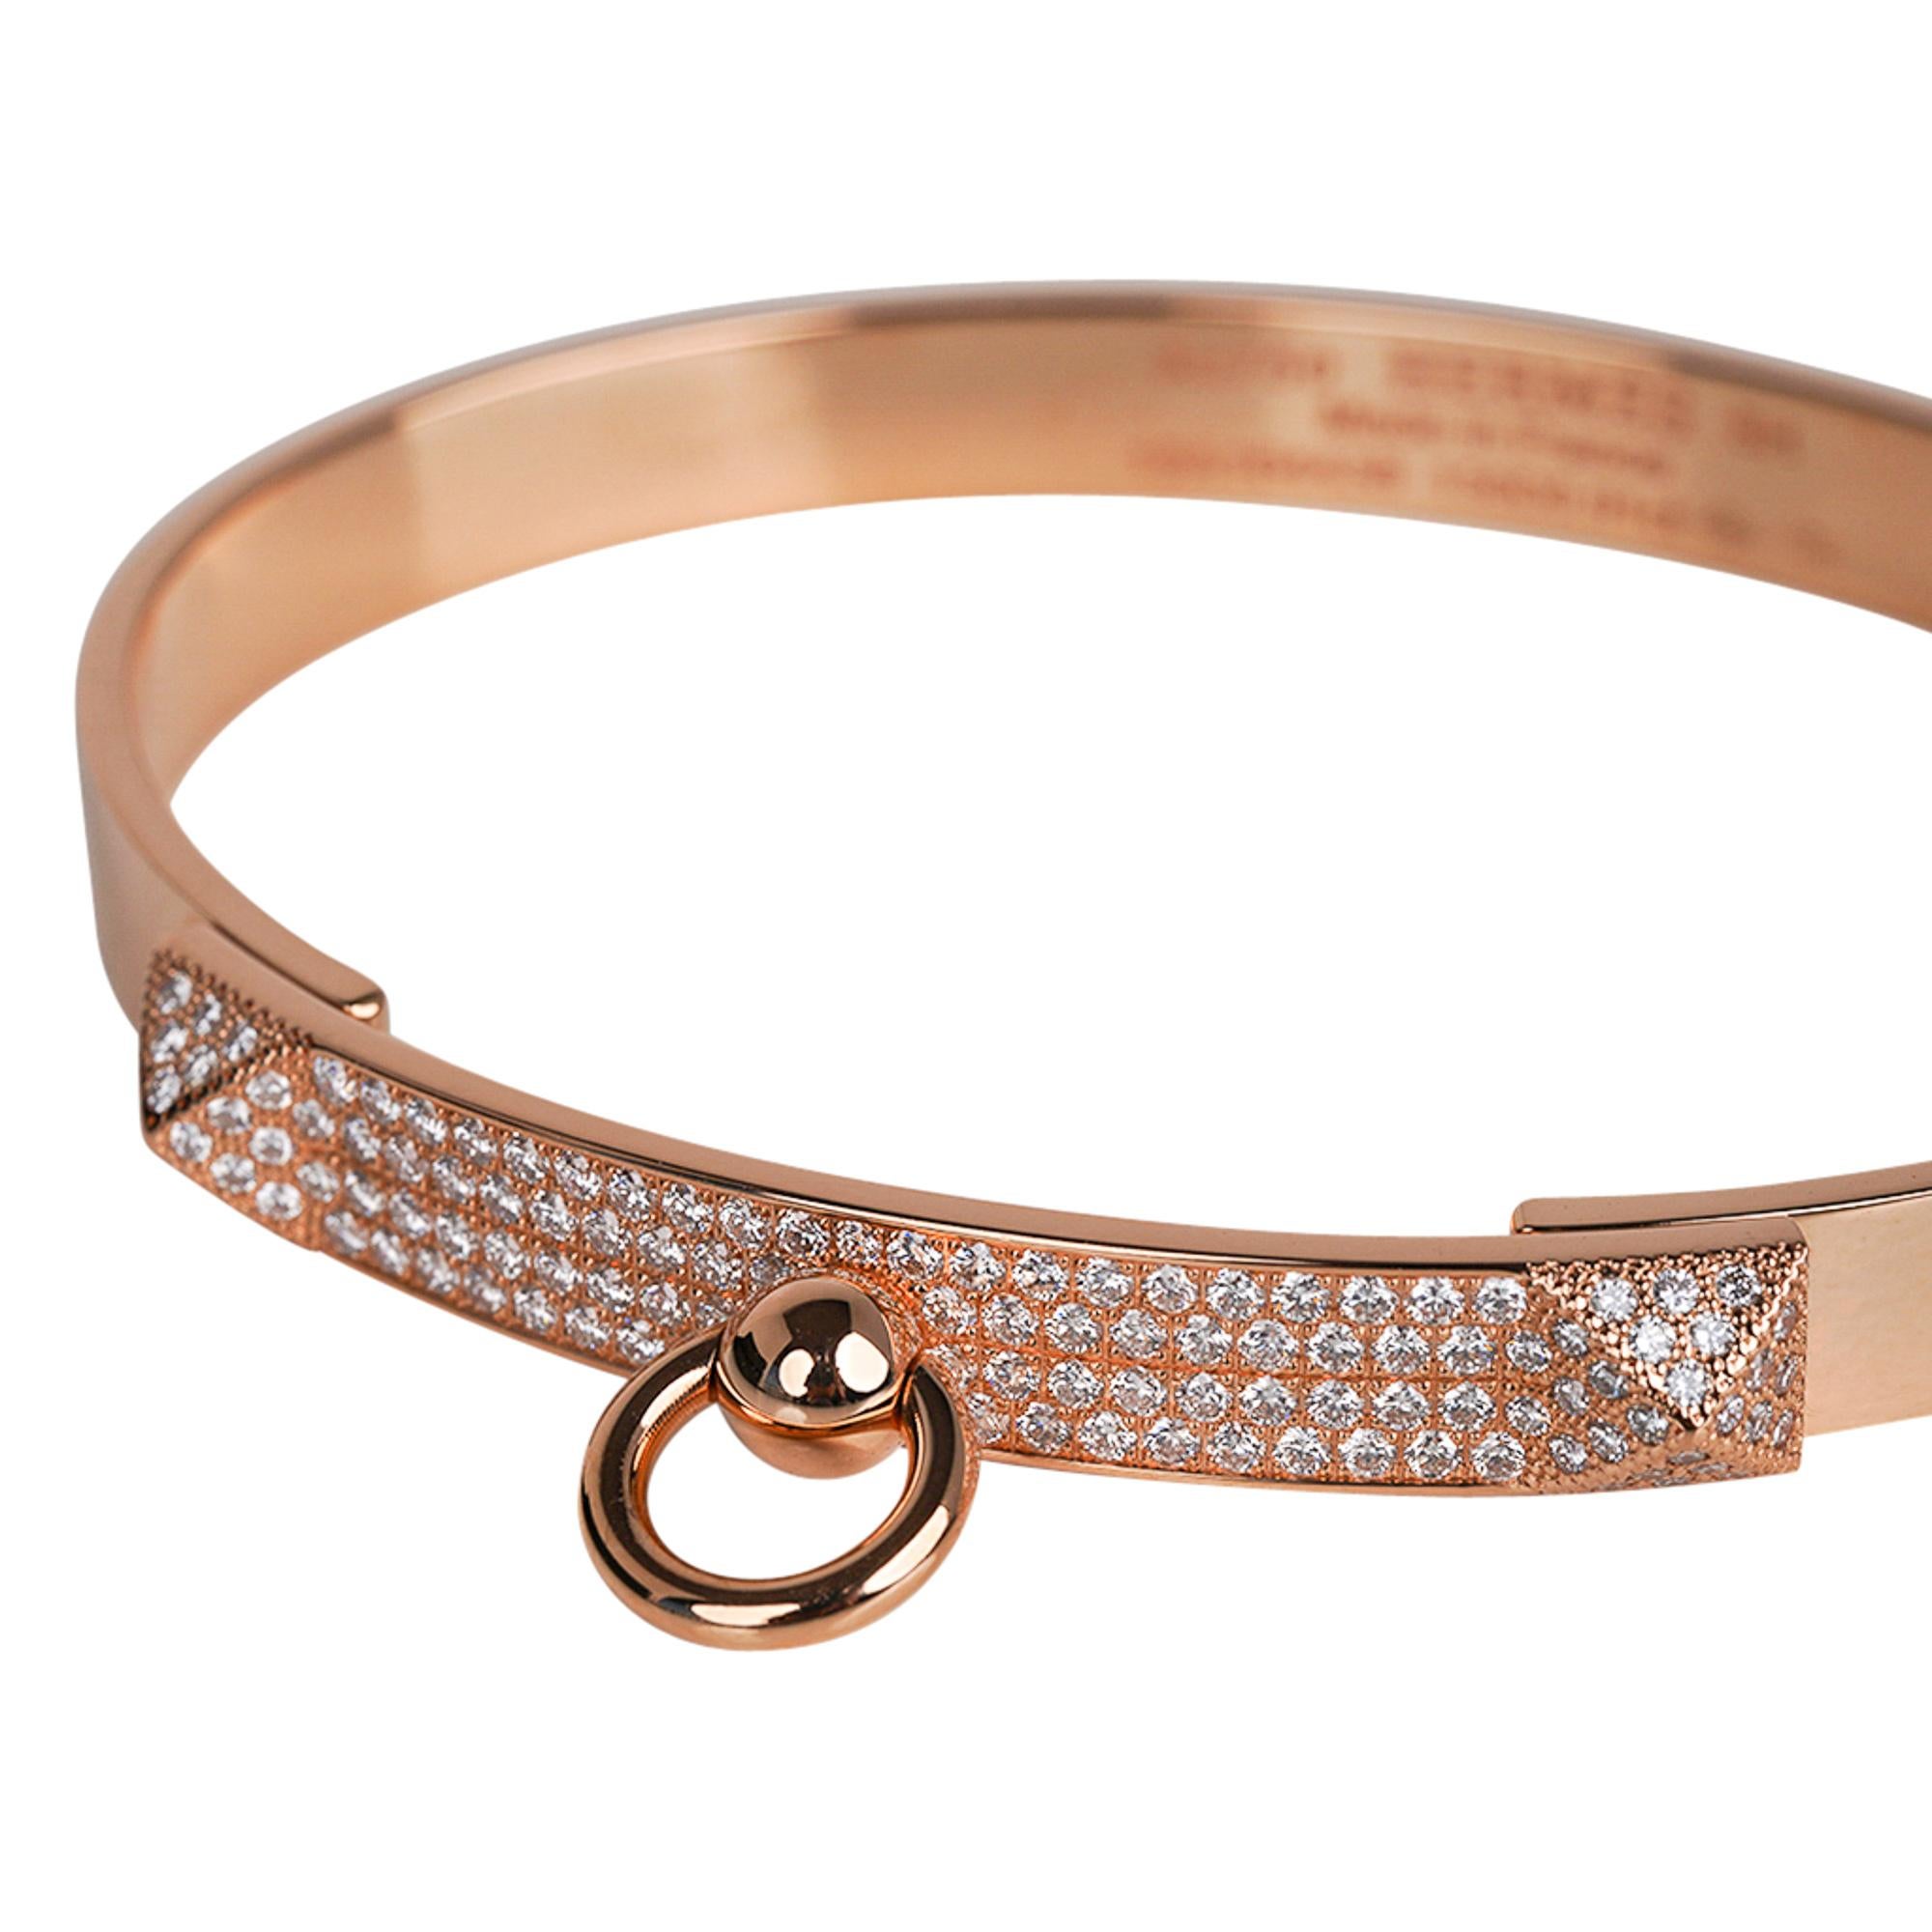 Mightychic offers a Hermes Diamond Collier de Chien bracelet featured in 18k Rose Gold.
Set with 130 Diamonds.
Total carat weight is .91
Chic and instantly recognizable.
Bracelet has signature stamps inside.
Comes with signature brown pouch and